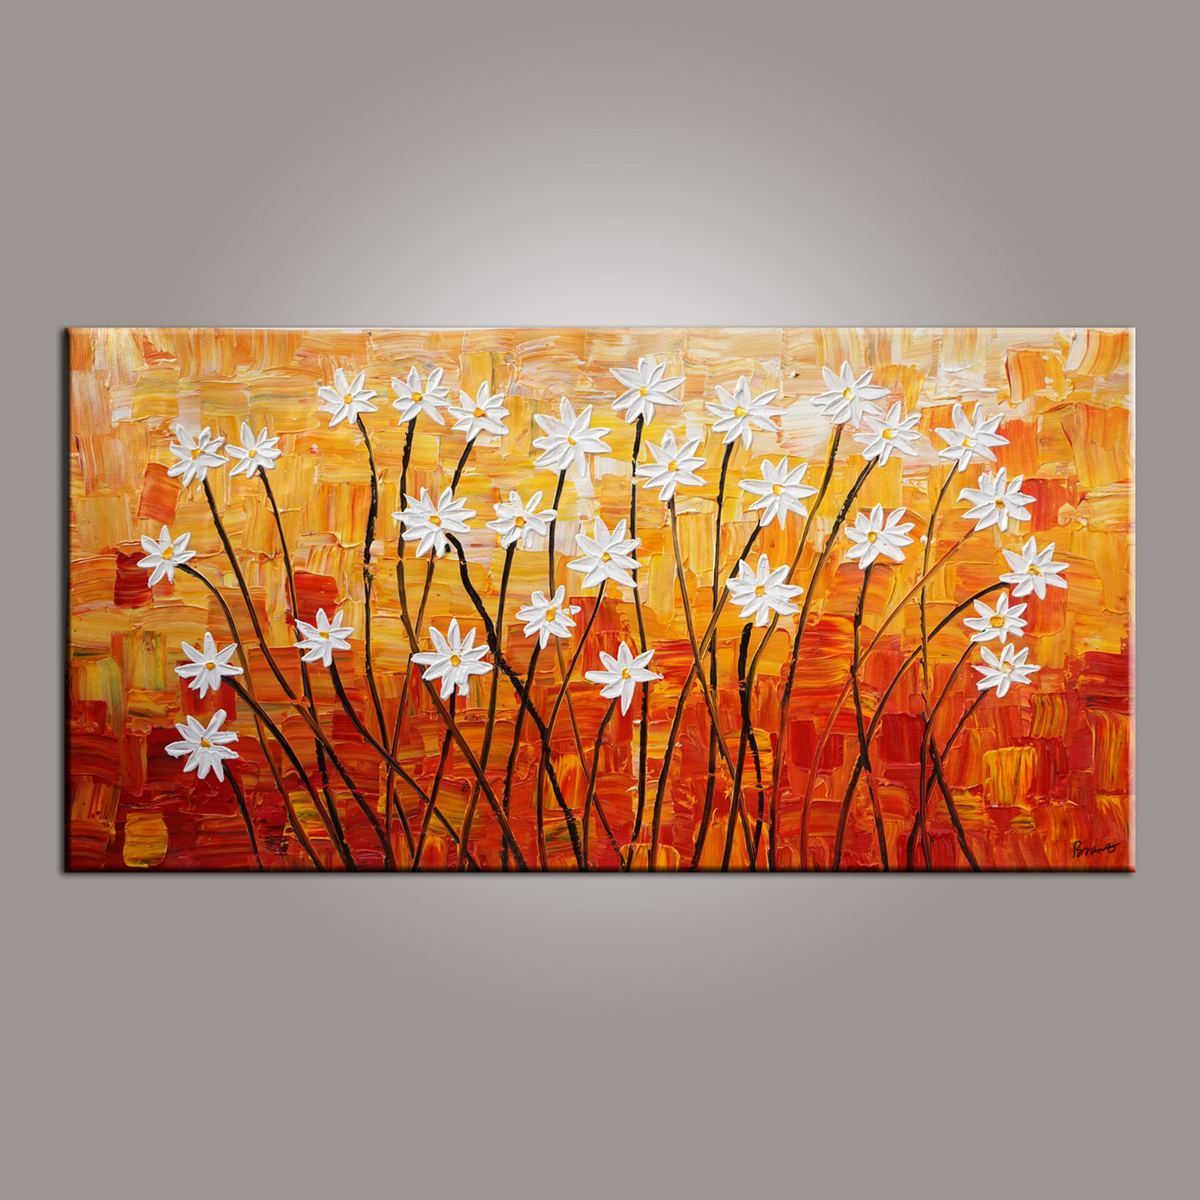 Spring Flower Painting, Painting for Sale, Flower Art, Abstract Art Painting, Canvas Wall Art, Bedroom Wall Art, Canvas Art, Modern Art, Contemporary Art-Grace Painting Crafts